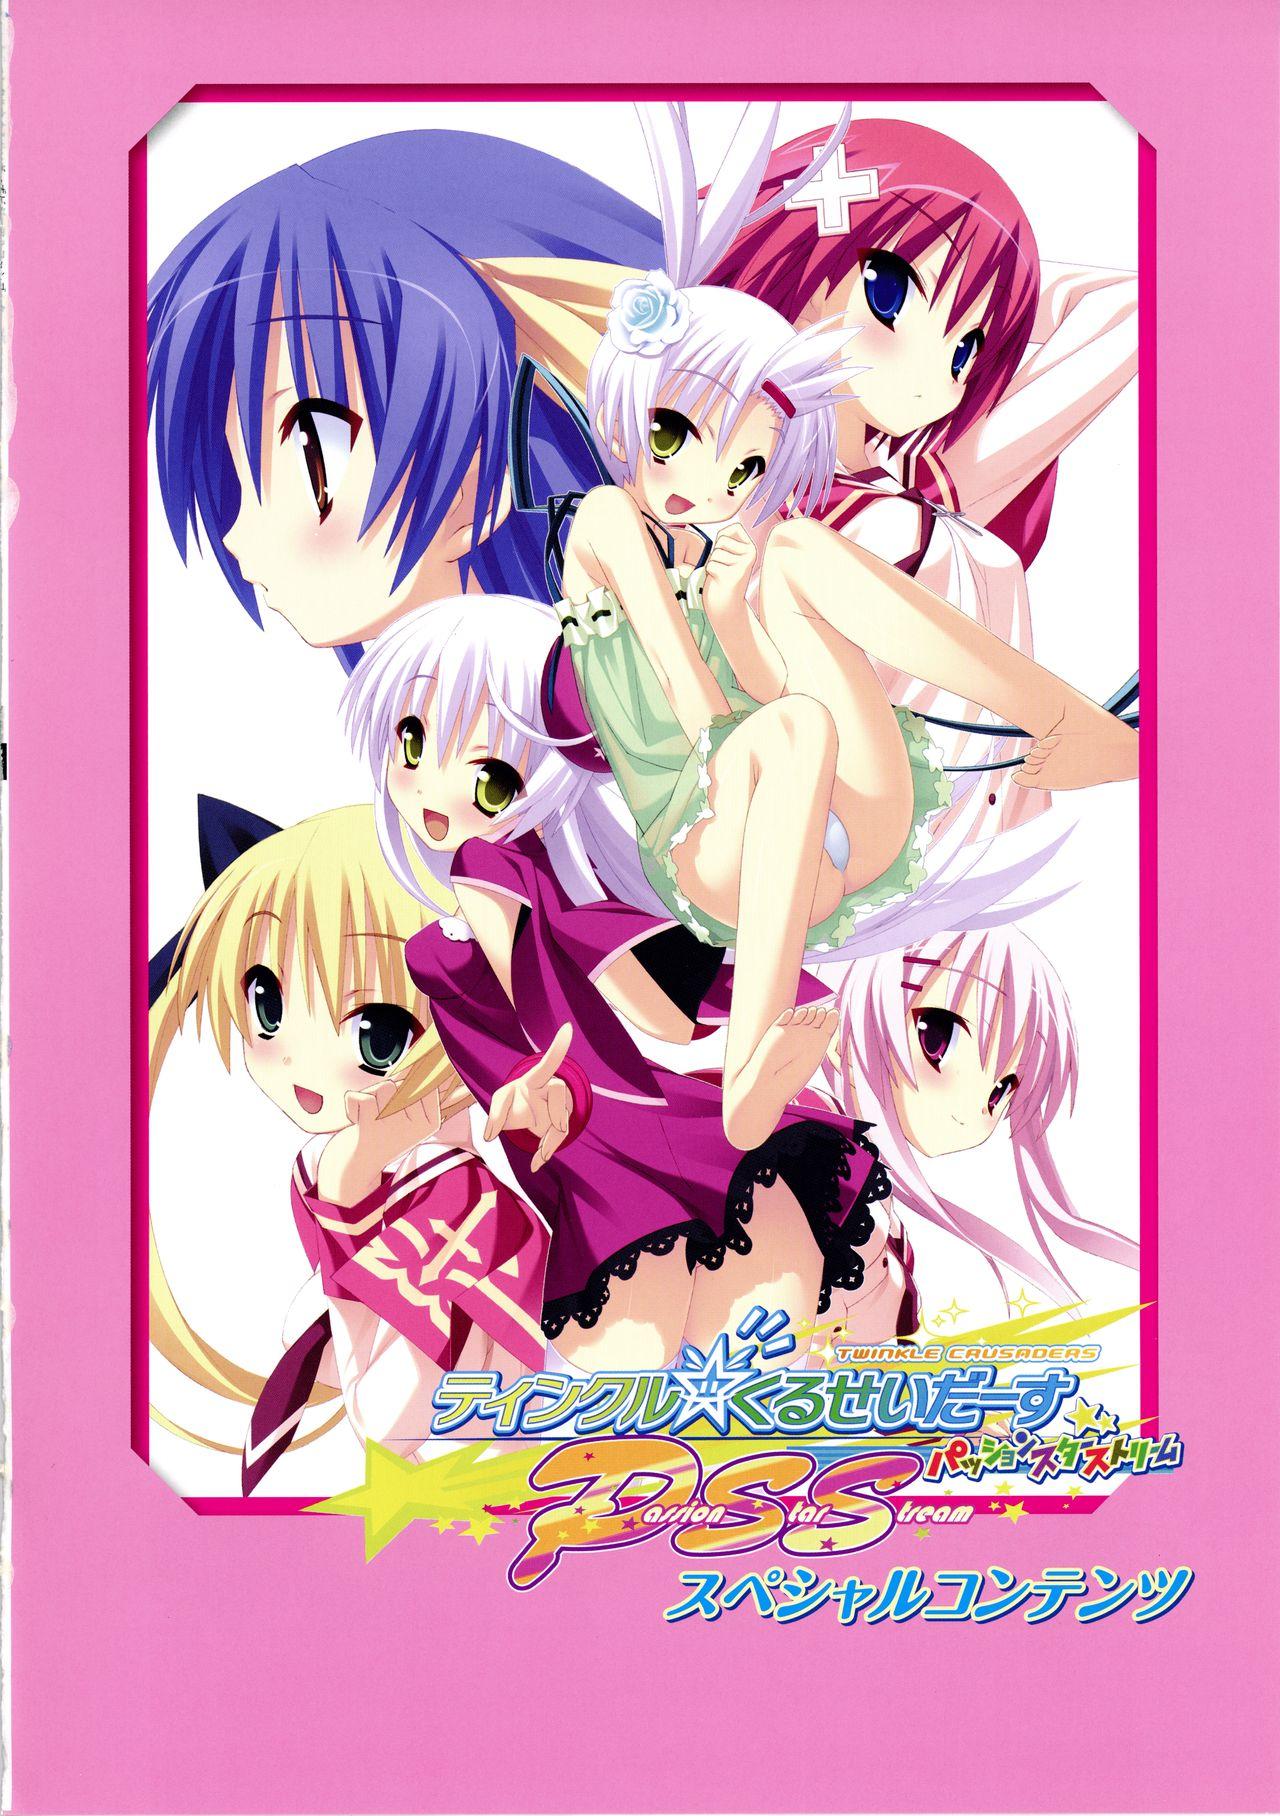 Twinkle☆Crusaders Passion Star Stream Visual Fanbook 111